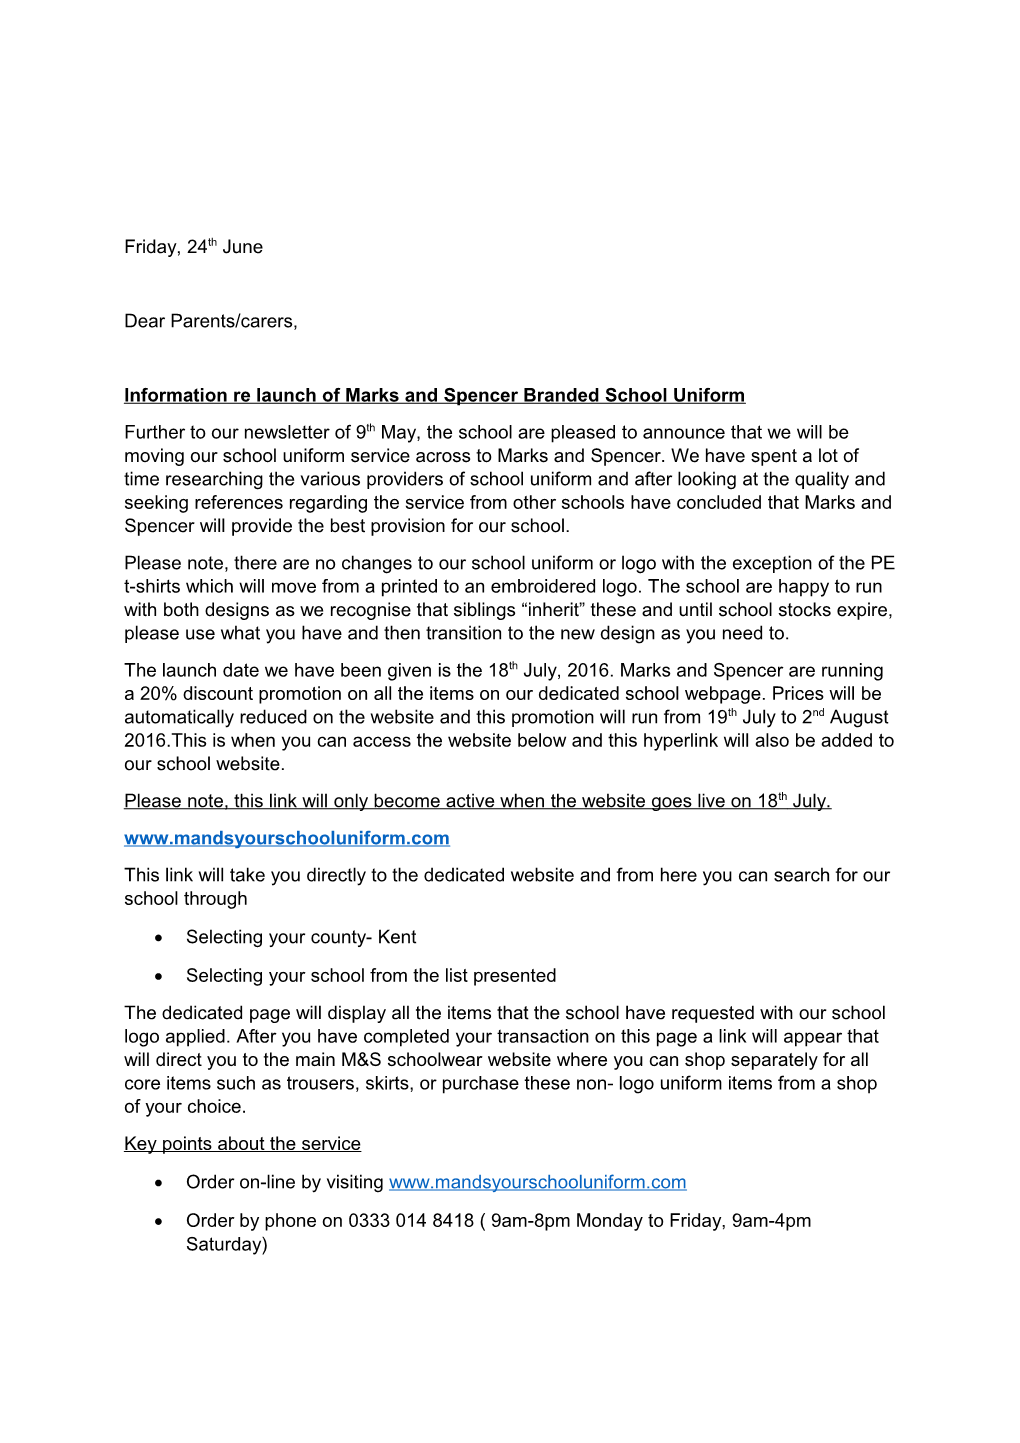 Information Re Launch of Marks and Spencer Branded School Uniform